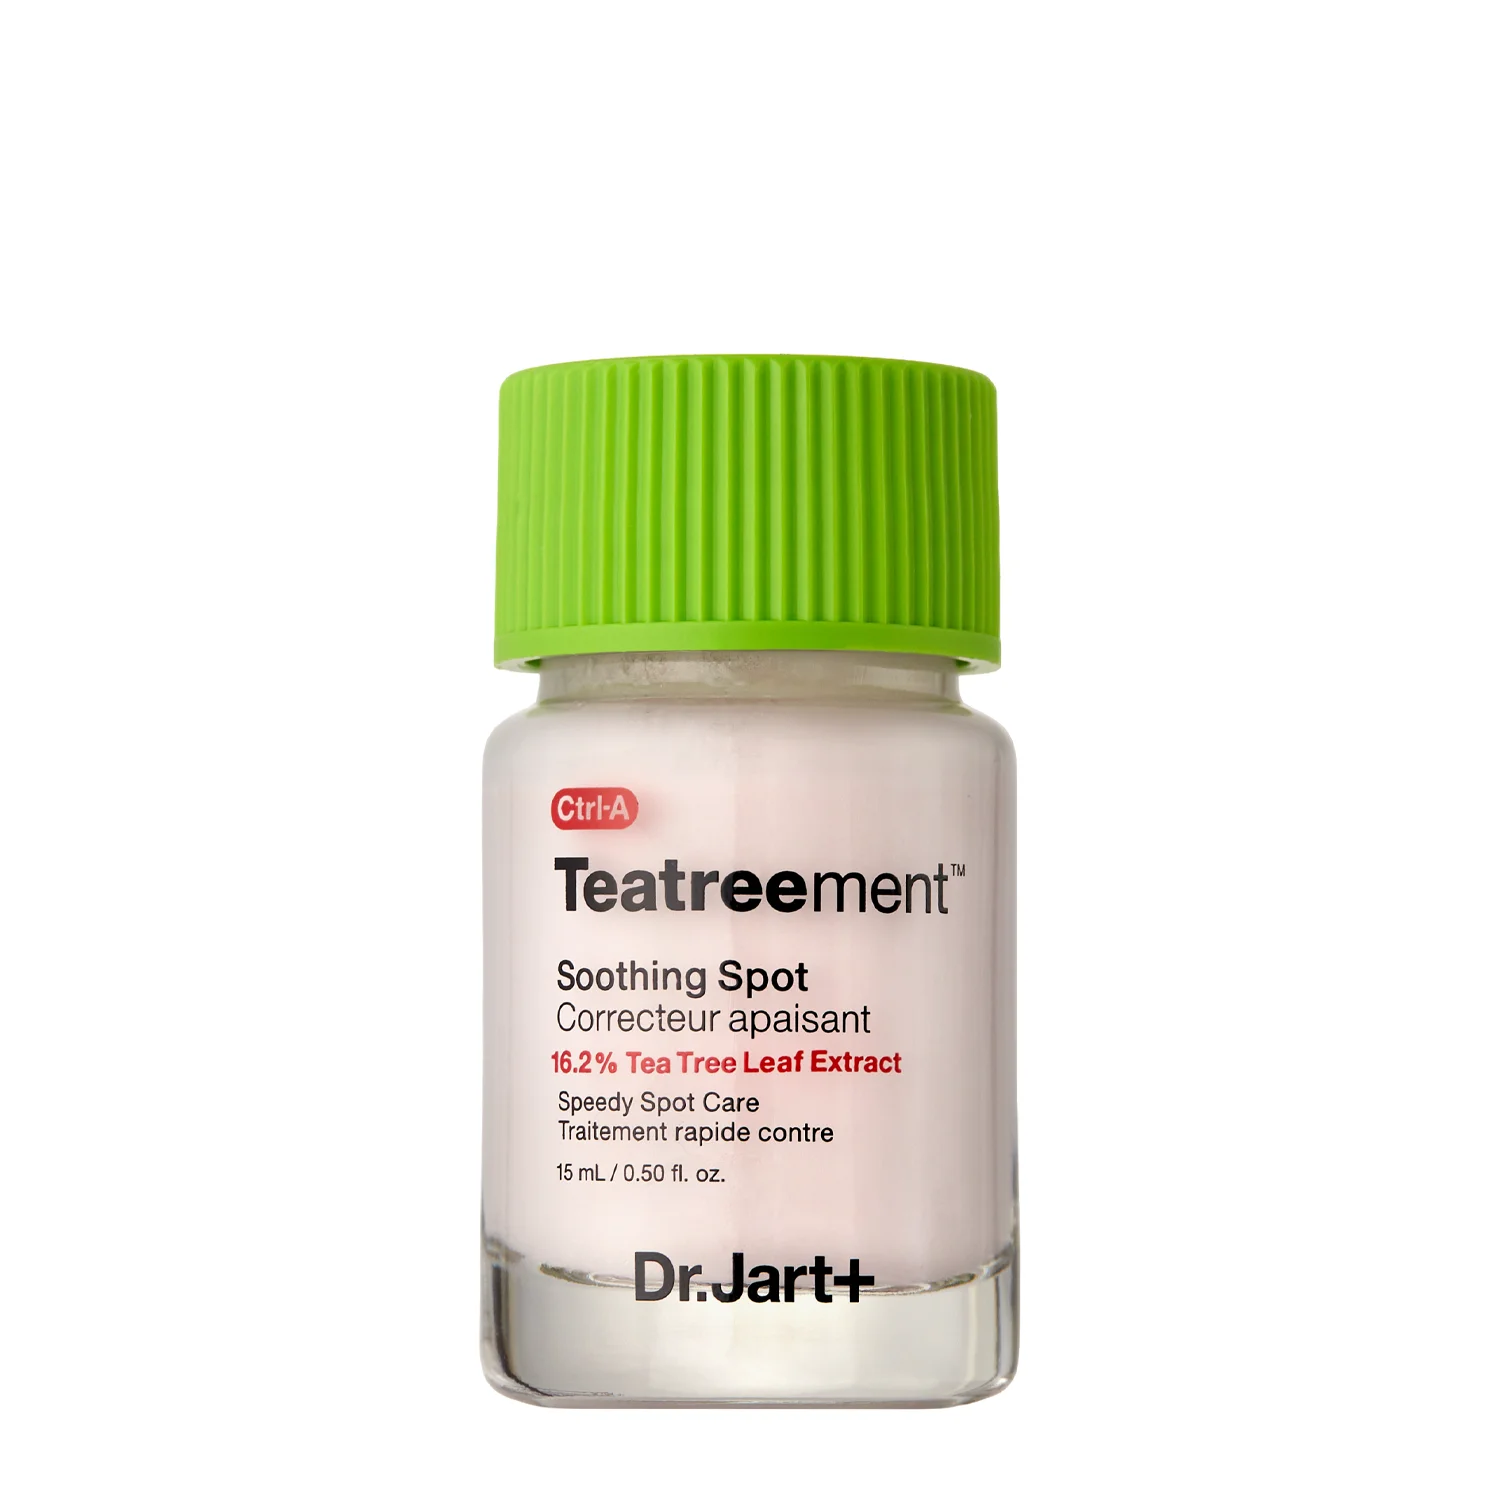 Dr. Jart+ - Ctrl-A Teatreement Soothing Spot - Liquid for Imperfections - 15ml